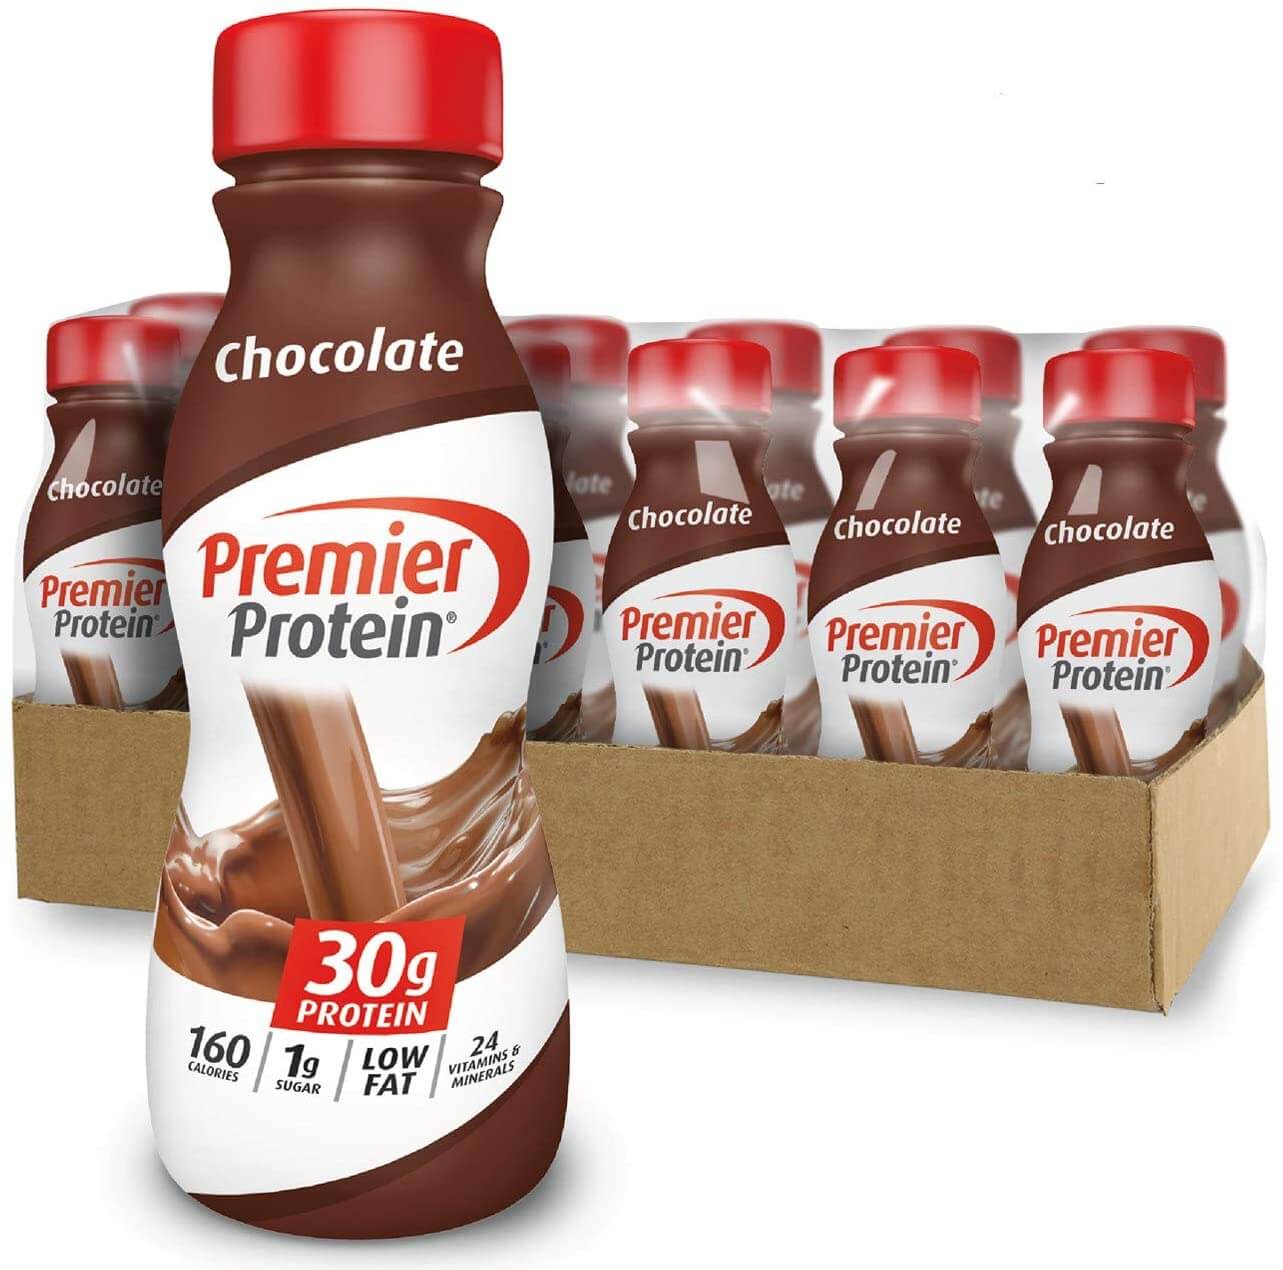 Premier Protein gluten-free meal replacement drink